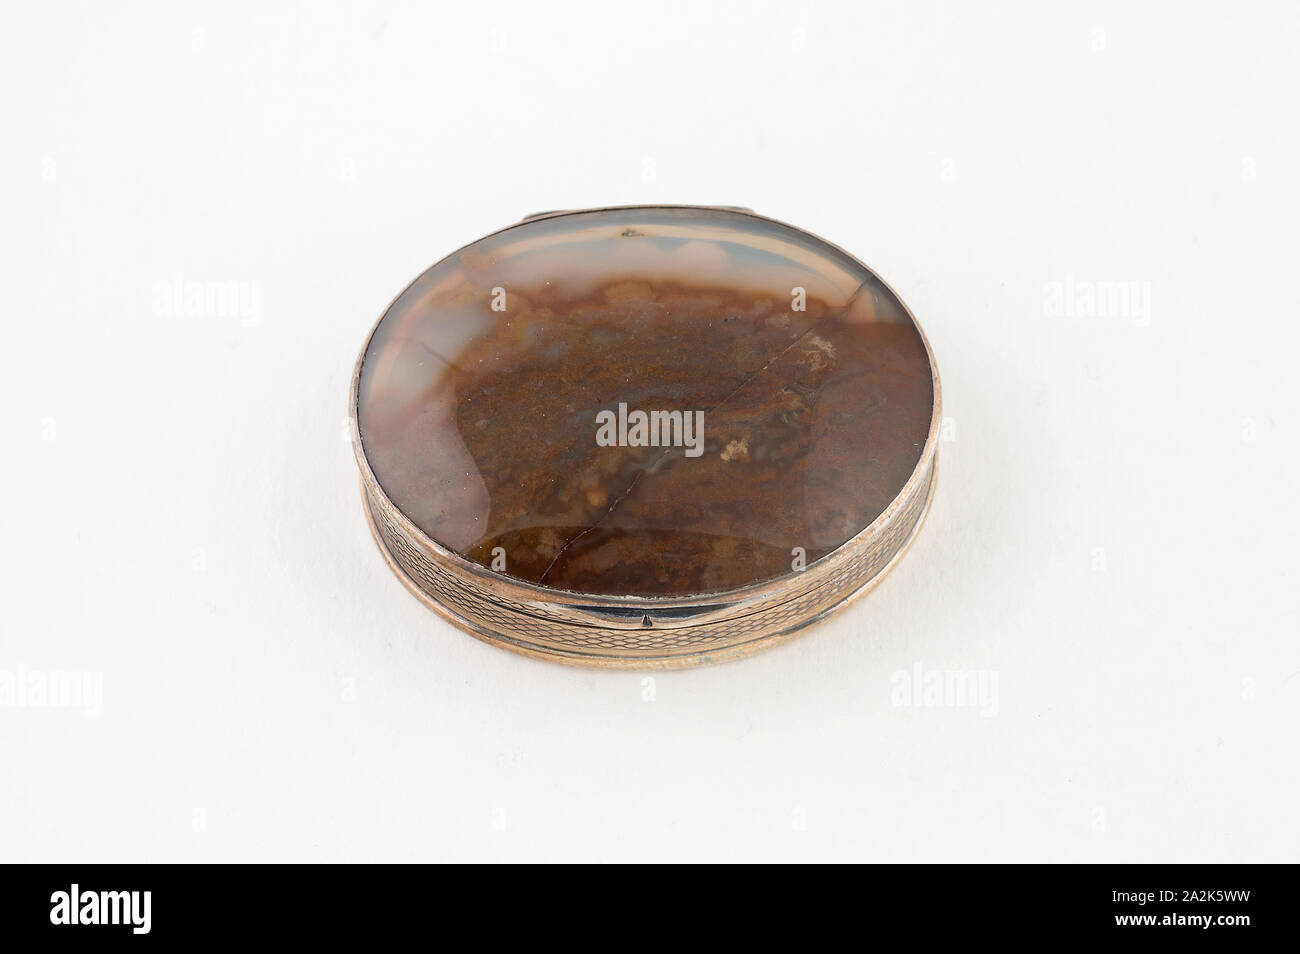 Vinaigrette, 1841/42, Marked CP WS, London, England, London, Silver, silver gilt, and agate, 3.5 x 4.1 cm (1 3/8 x 1 5/8 in Stock Photo